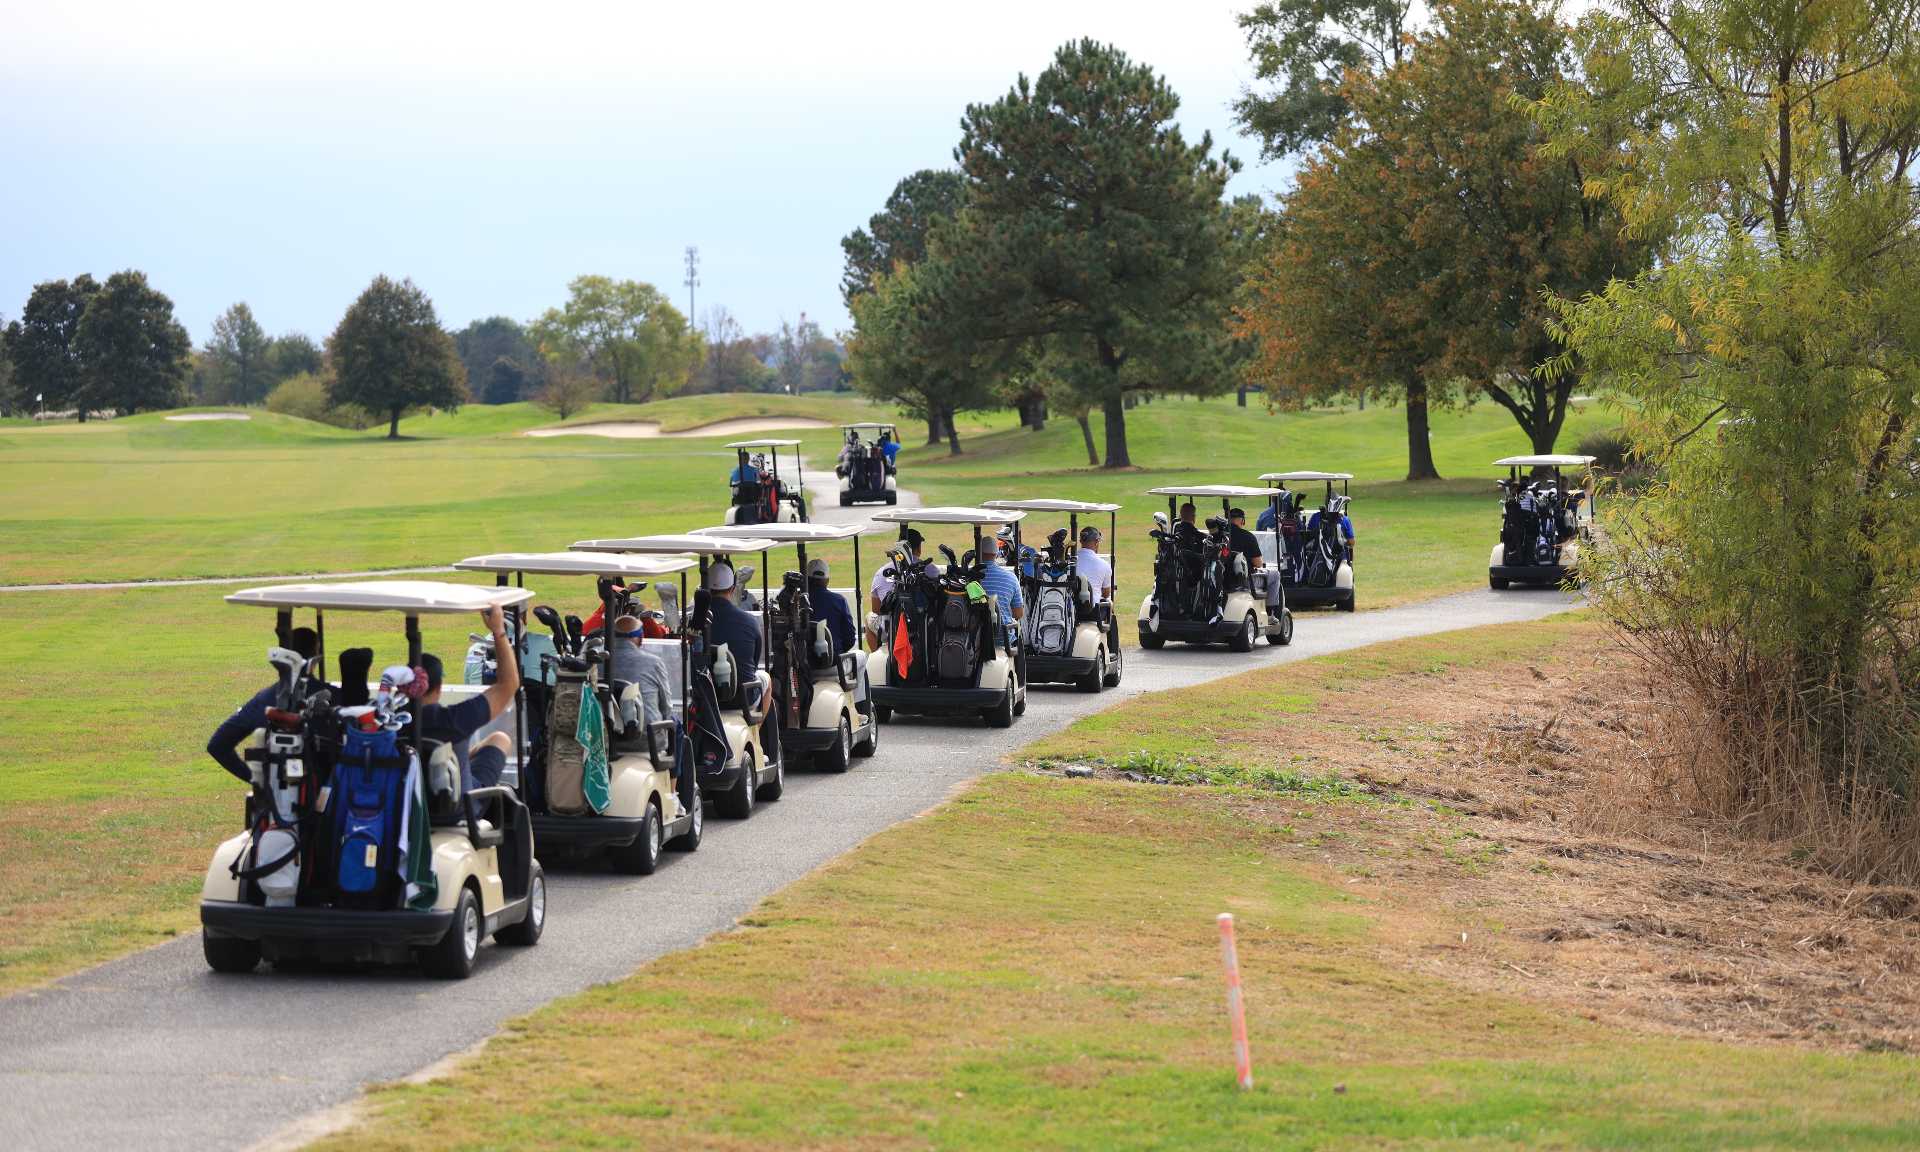 Golf carts filled with golfers participating in tournament drive down path on the golf course.